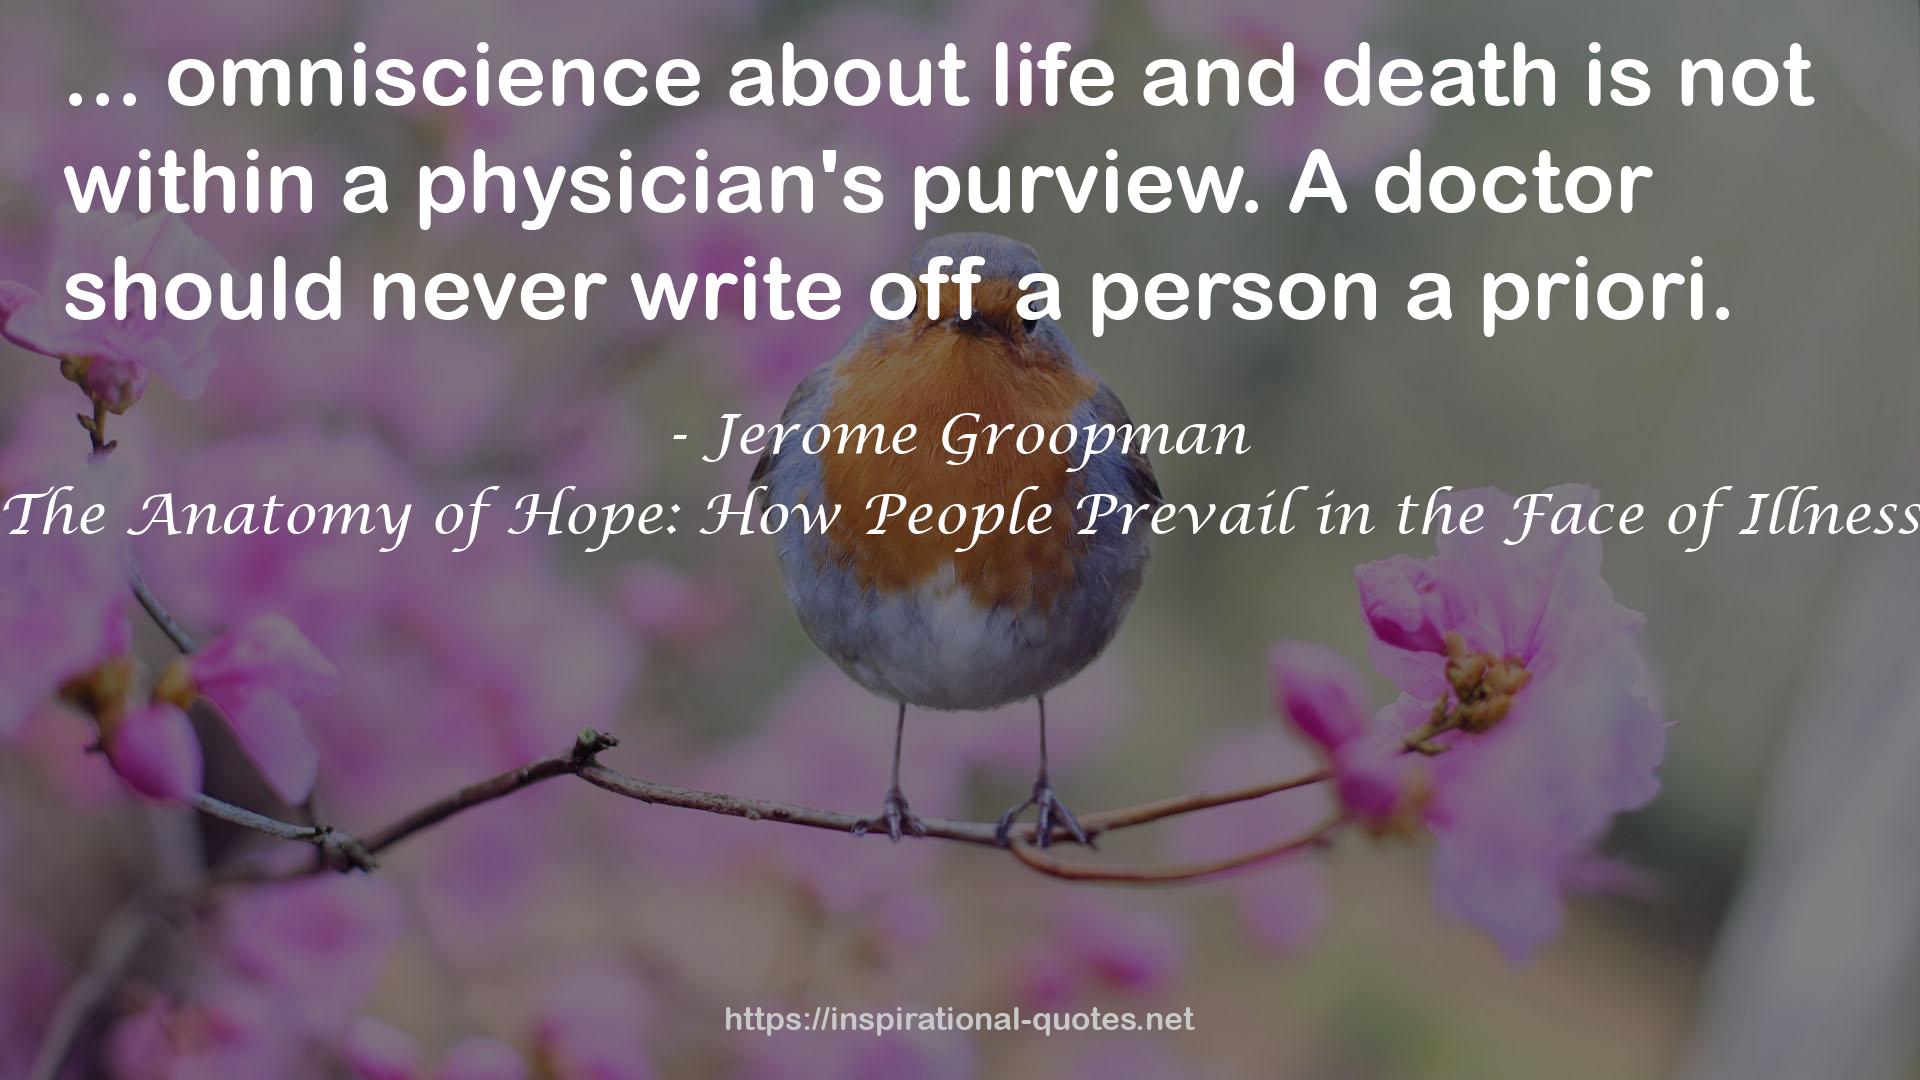 The Anatomy of Hope: How People Prevail in the Face of Illness QUOTES